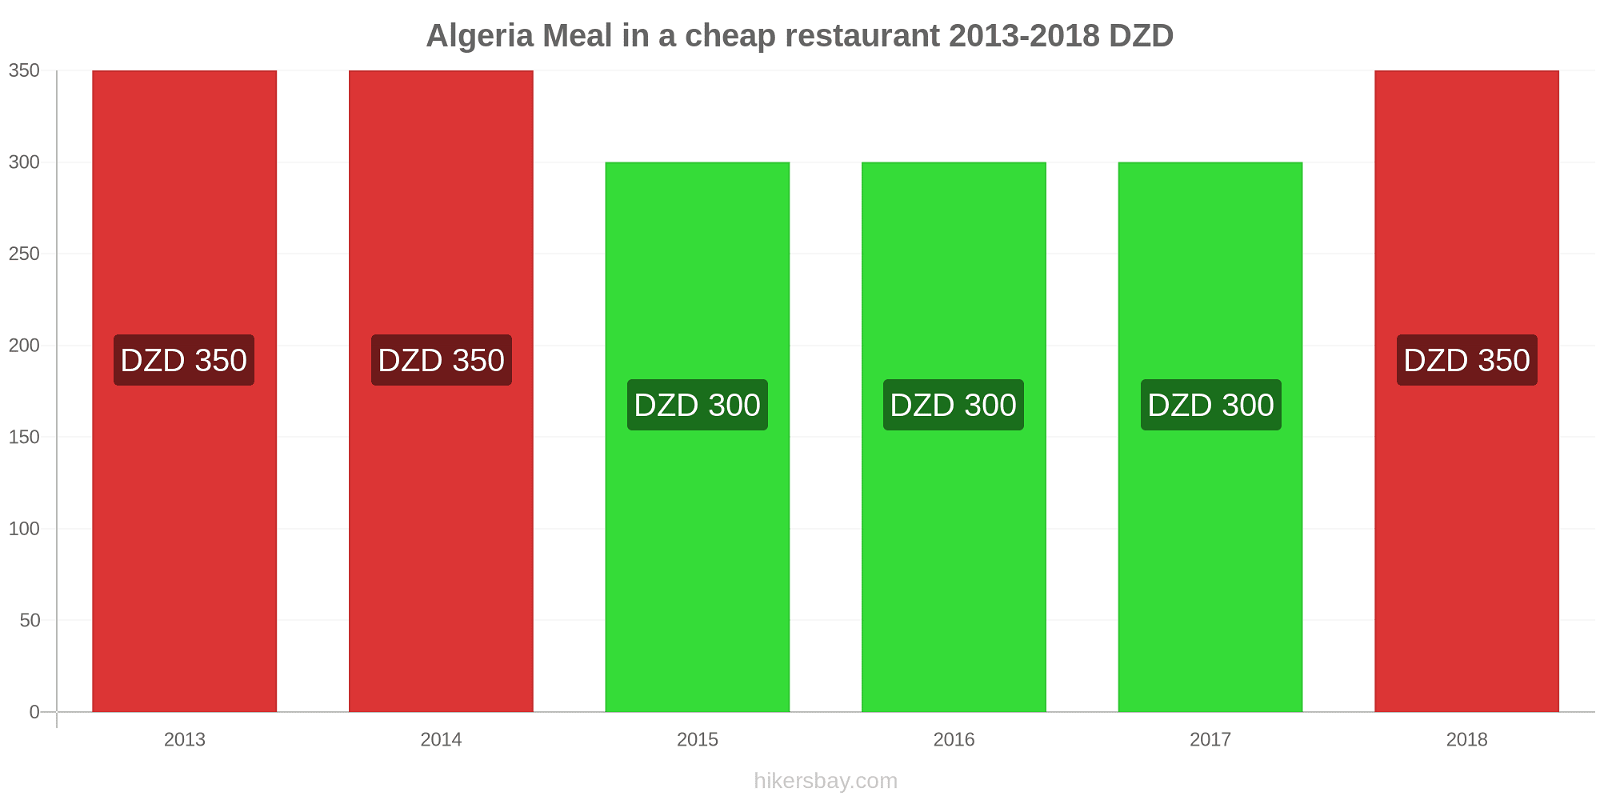 Algeria price changes Meal in a cheap restaurant hikersbay.com